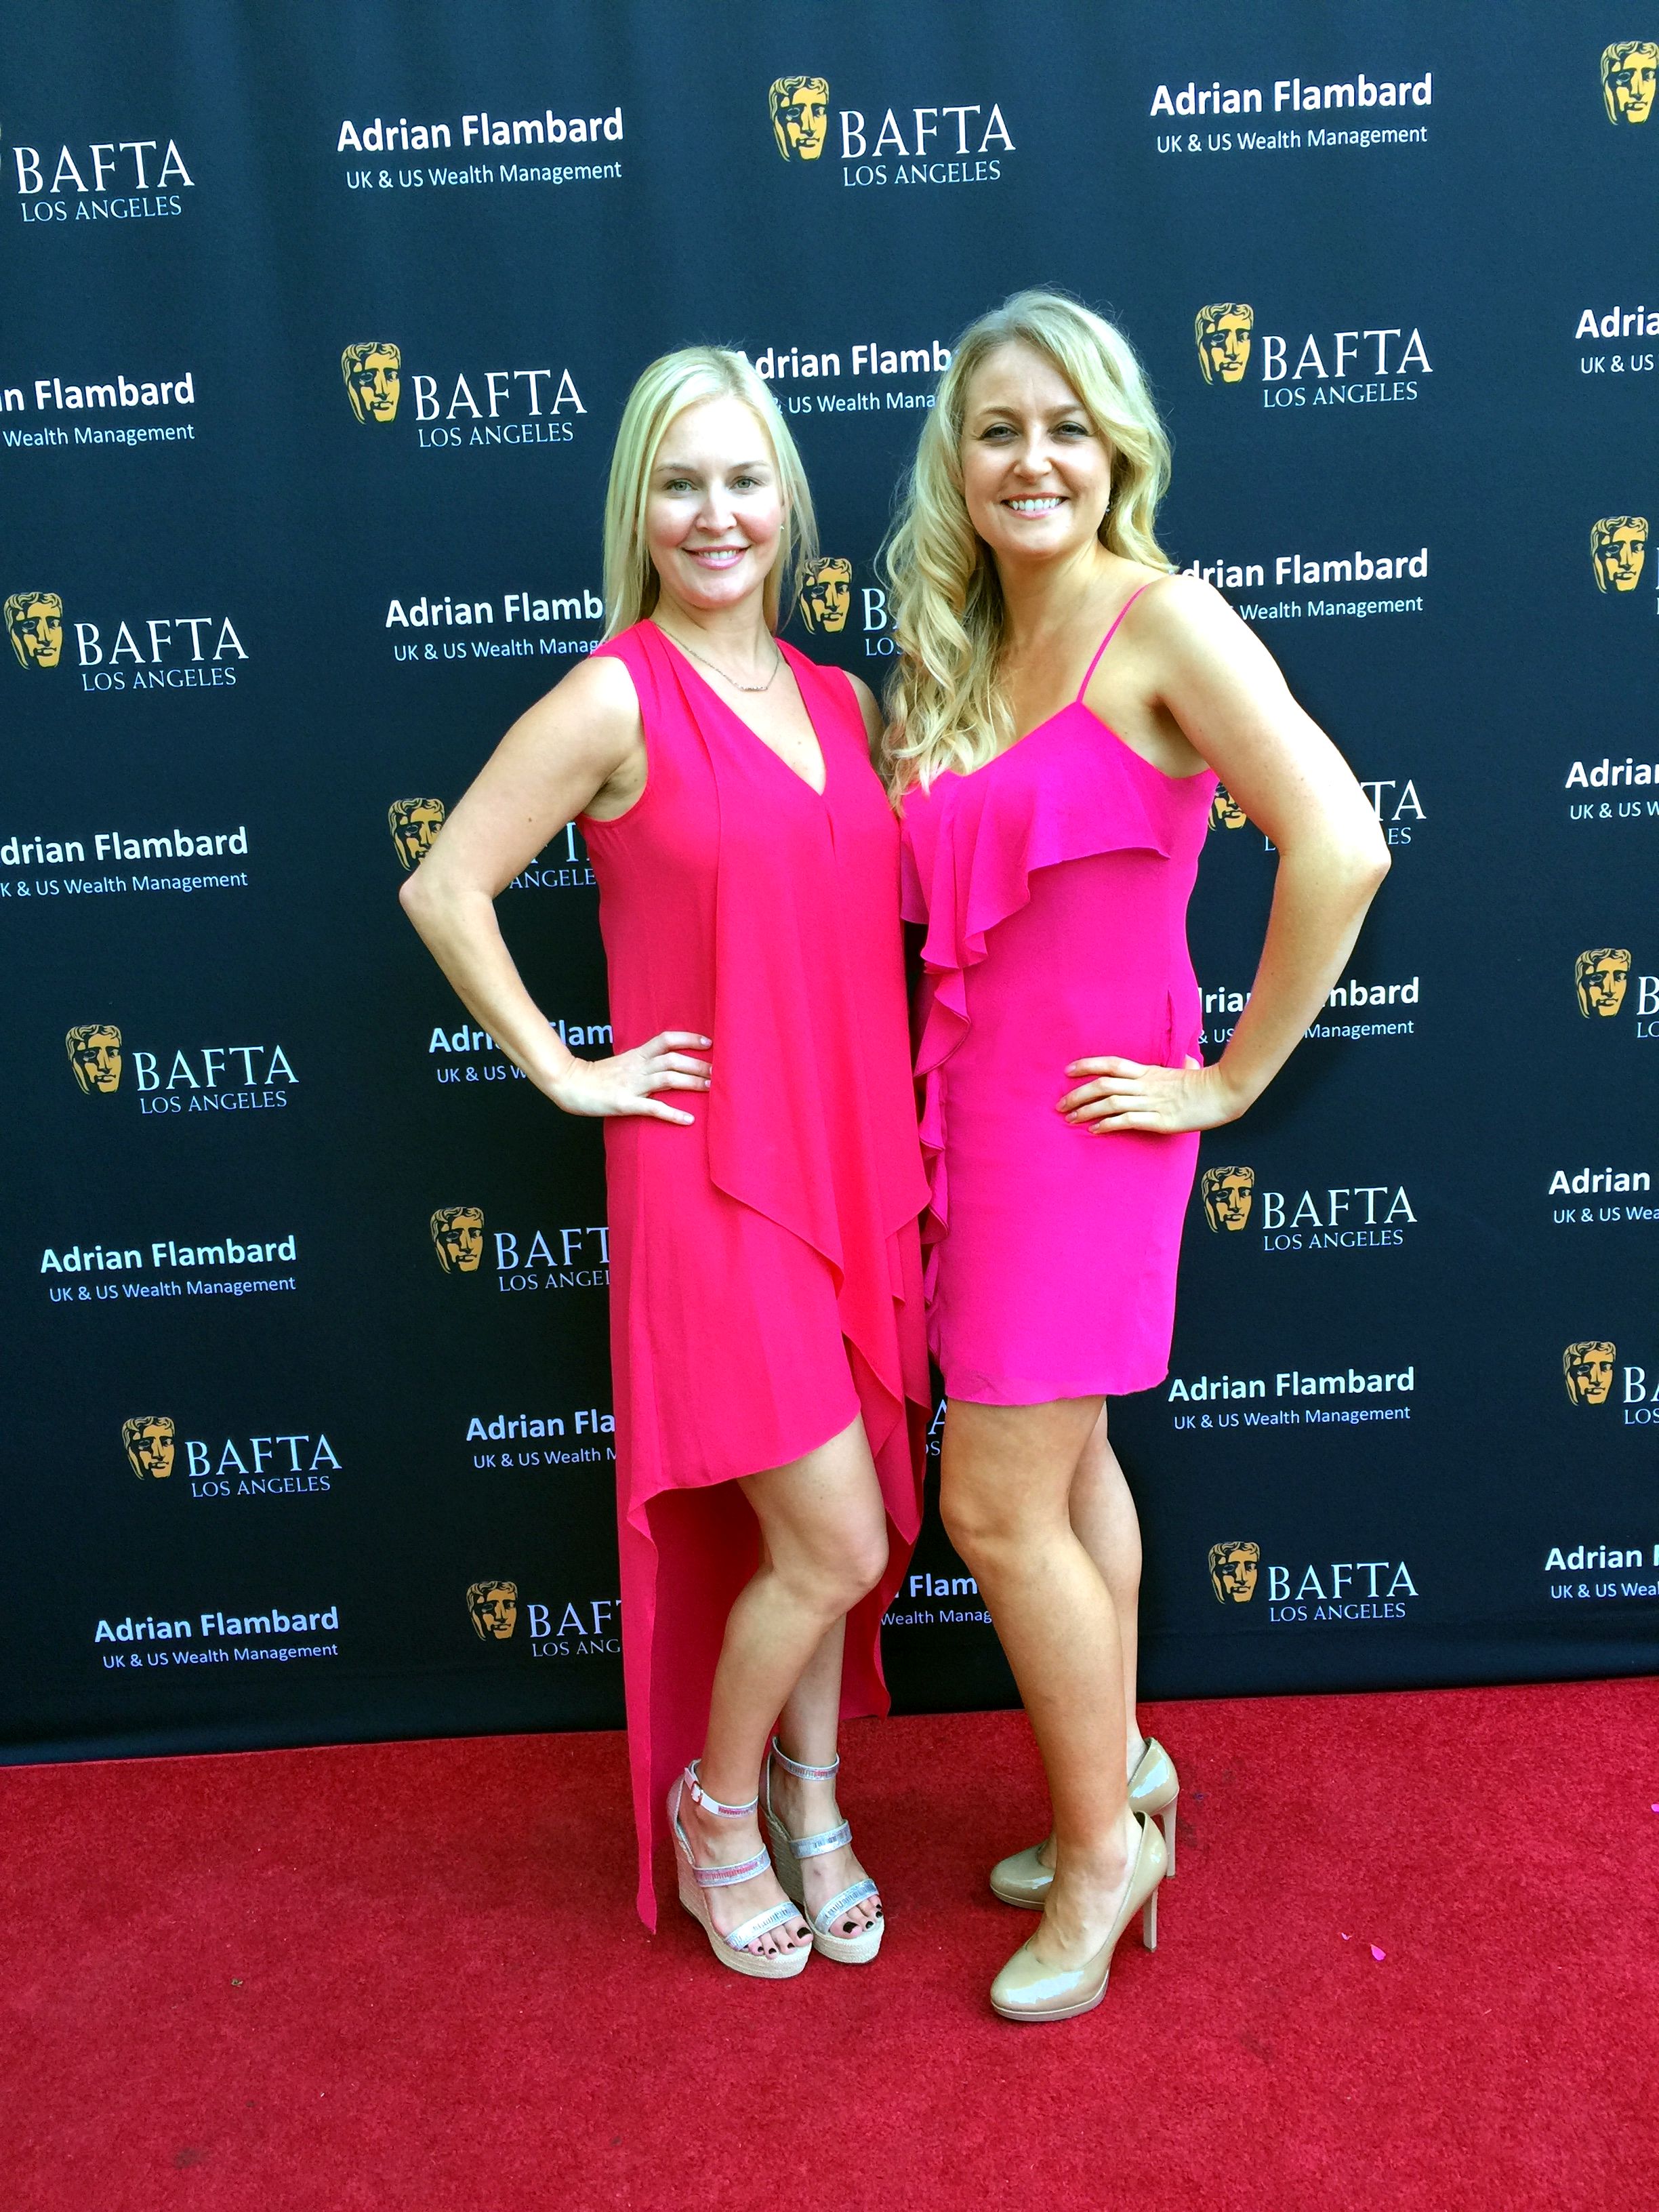 BAFTA LA Garden party Janine Gateland with Co Producer Rachel Ryling. Creating, Producing, Writing and Performing in 'F***, Marry, Kill' movie together.